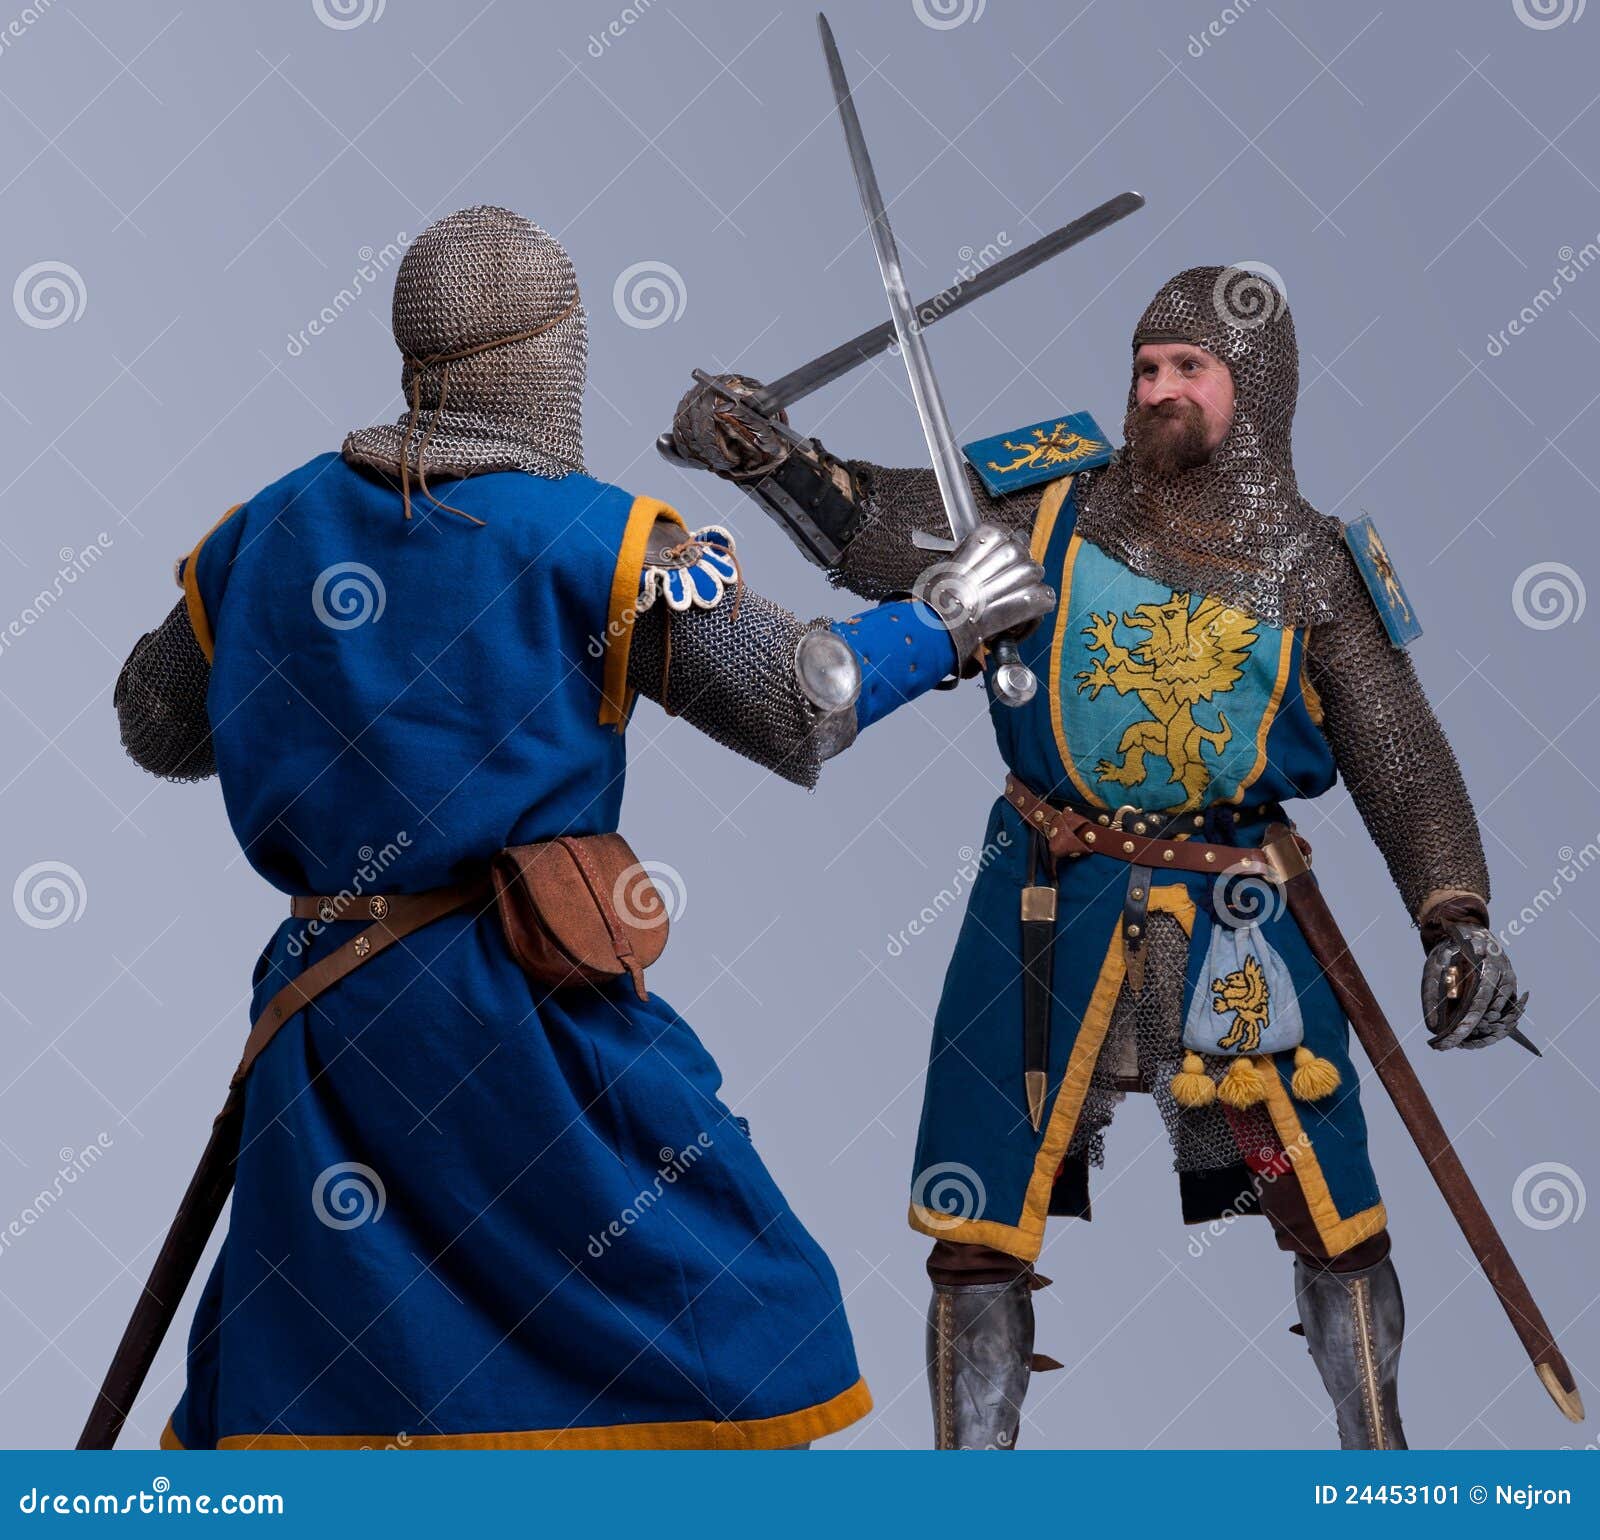 two-medieval-knights-fighting-each-other-armor-24453101.jpg